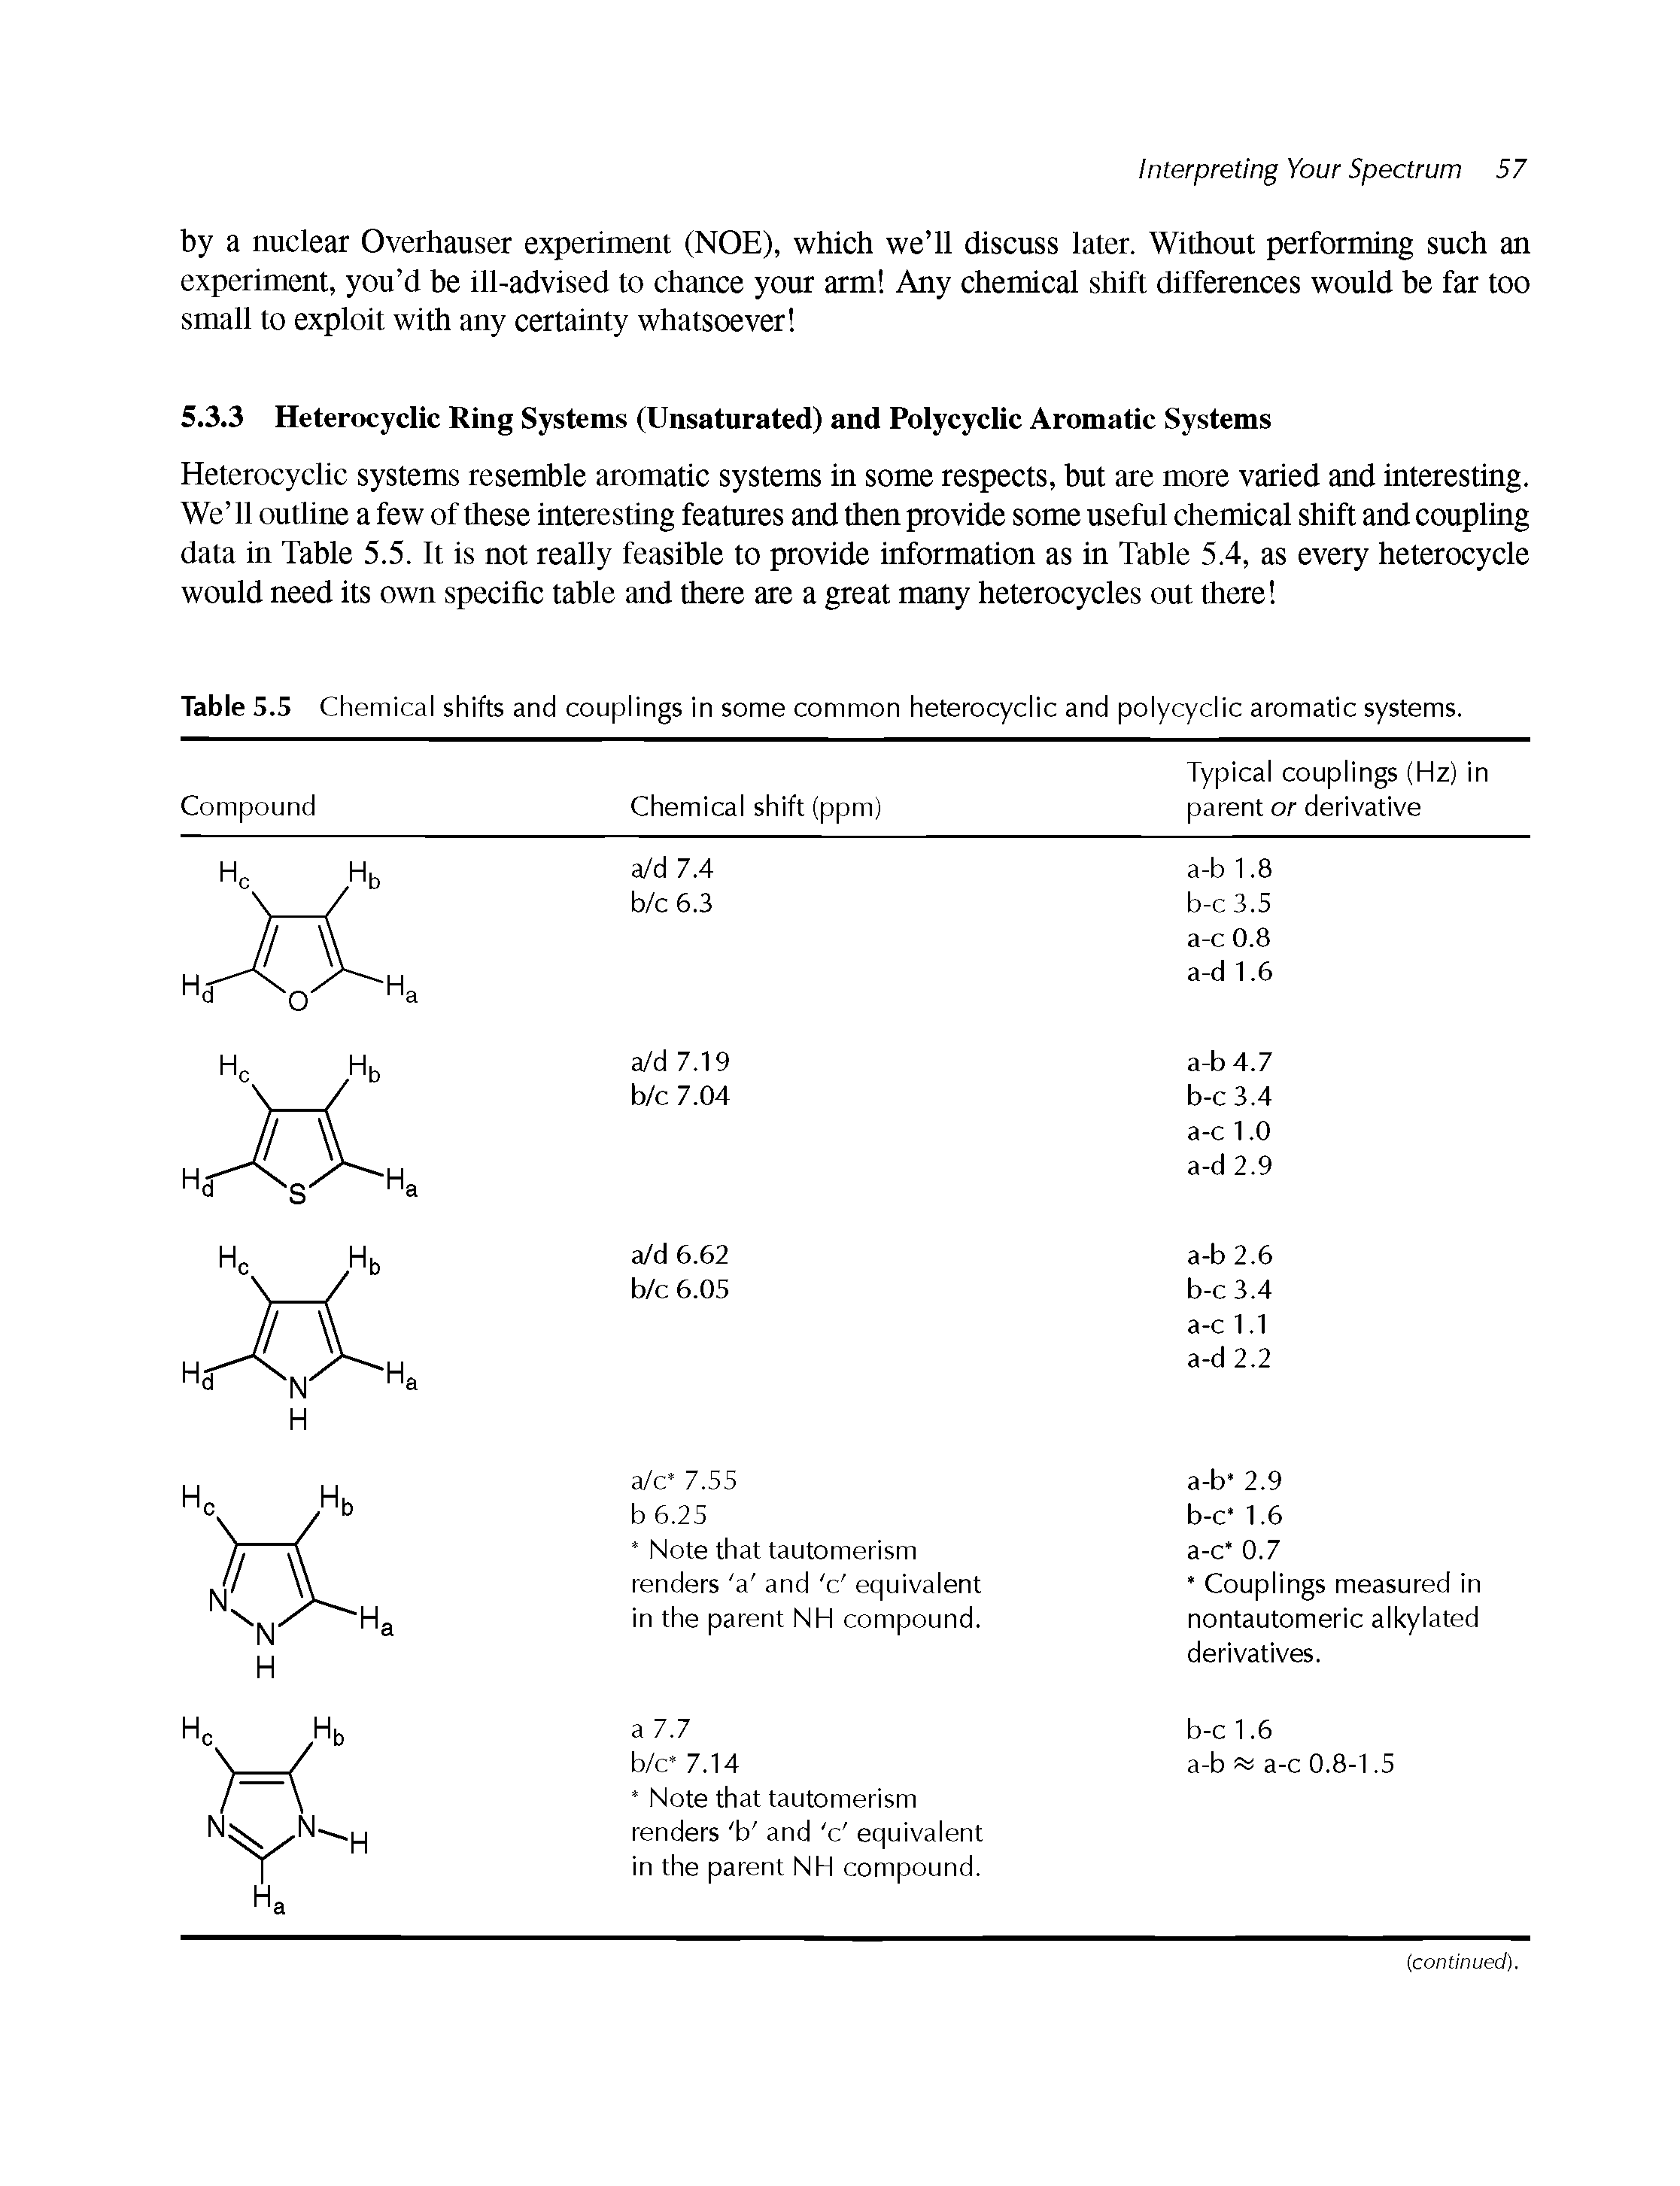 Table 5.5 Chemical shifts and couplings in some common heterocyclic and polycyclic aromatic systems.